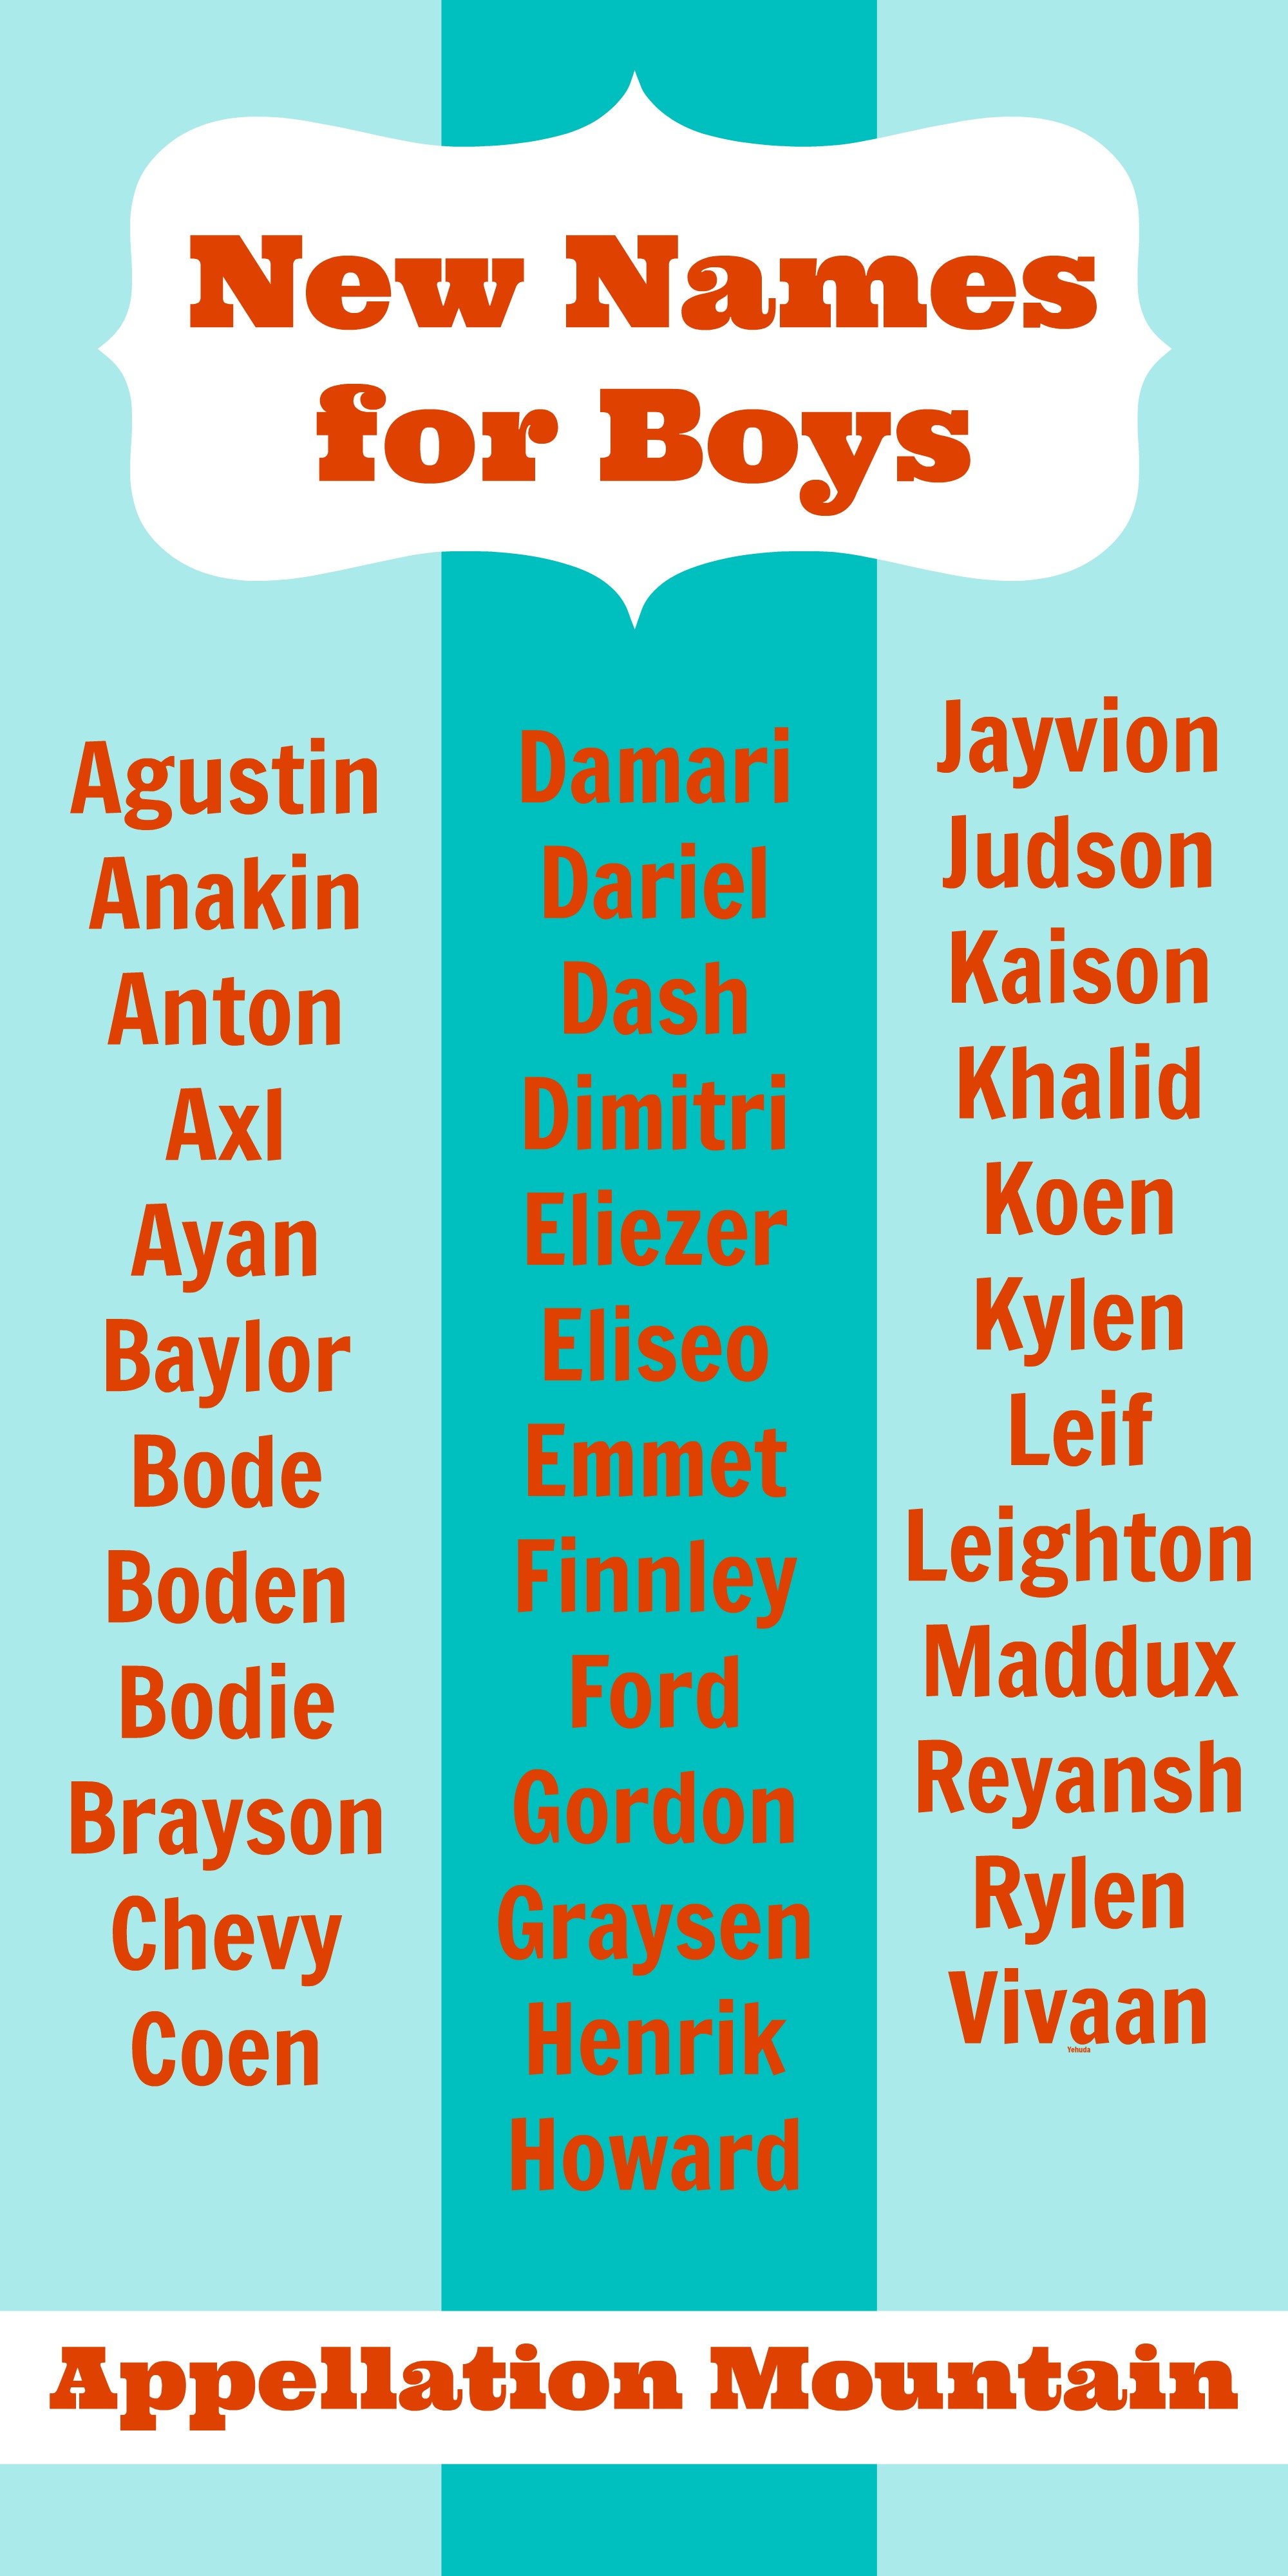 Look Back: New Names for Boys 2014 - Appellation Mountain
